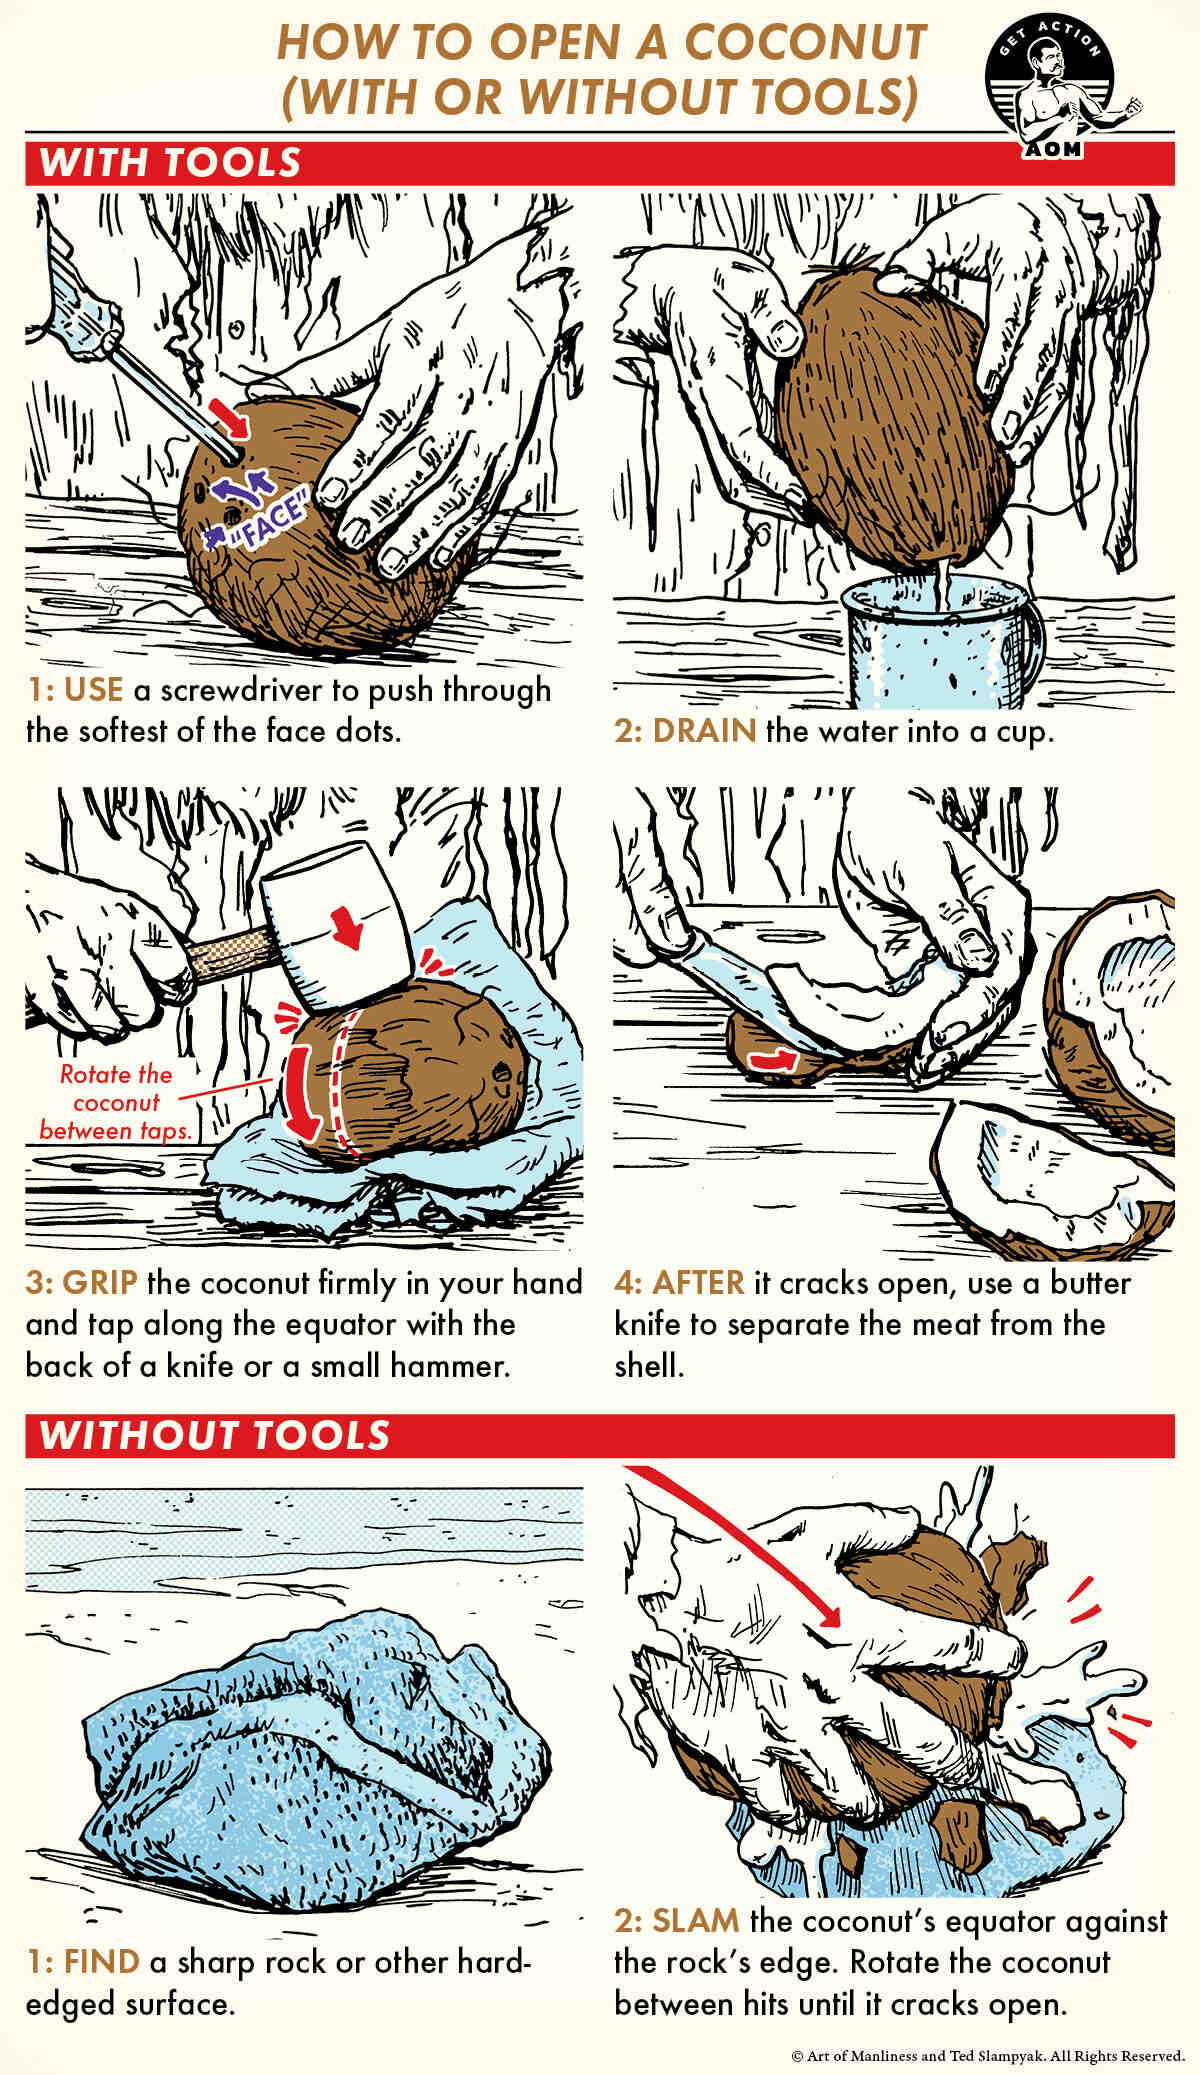 How do you open a coconut without husks?